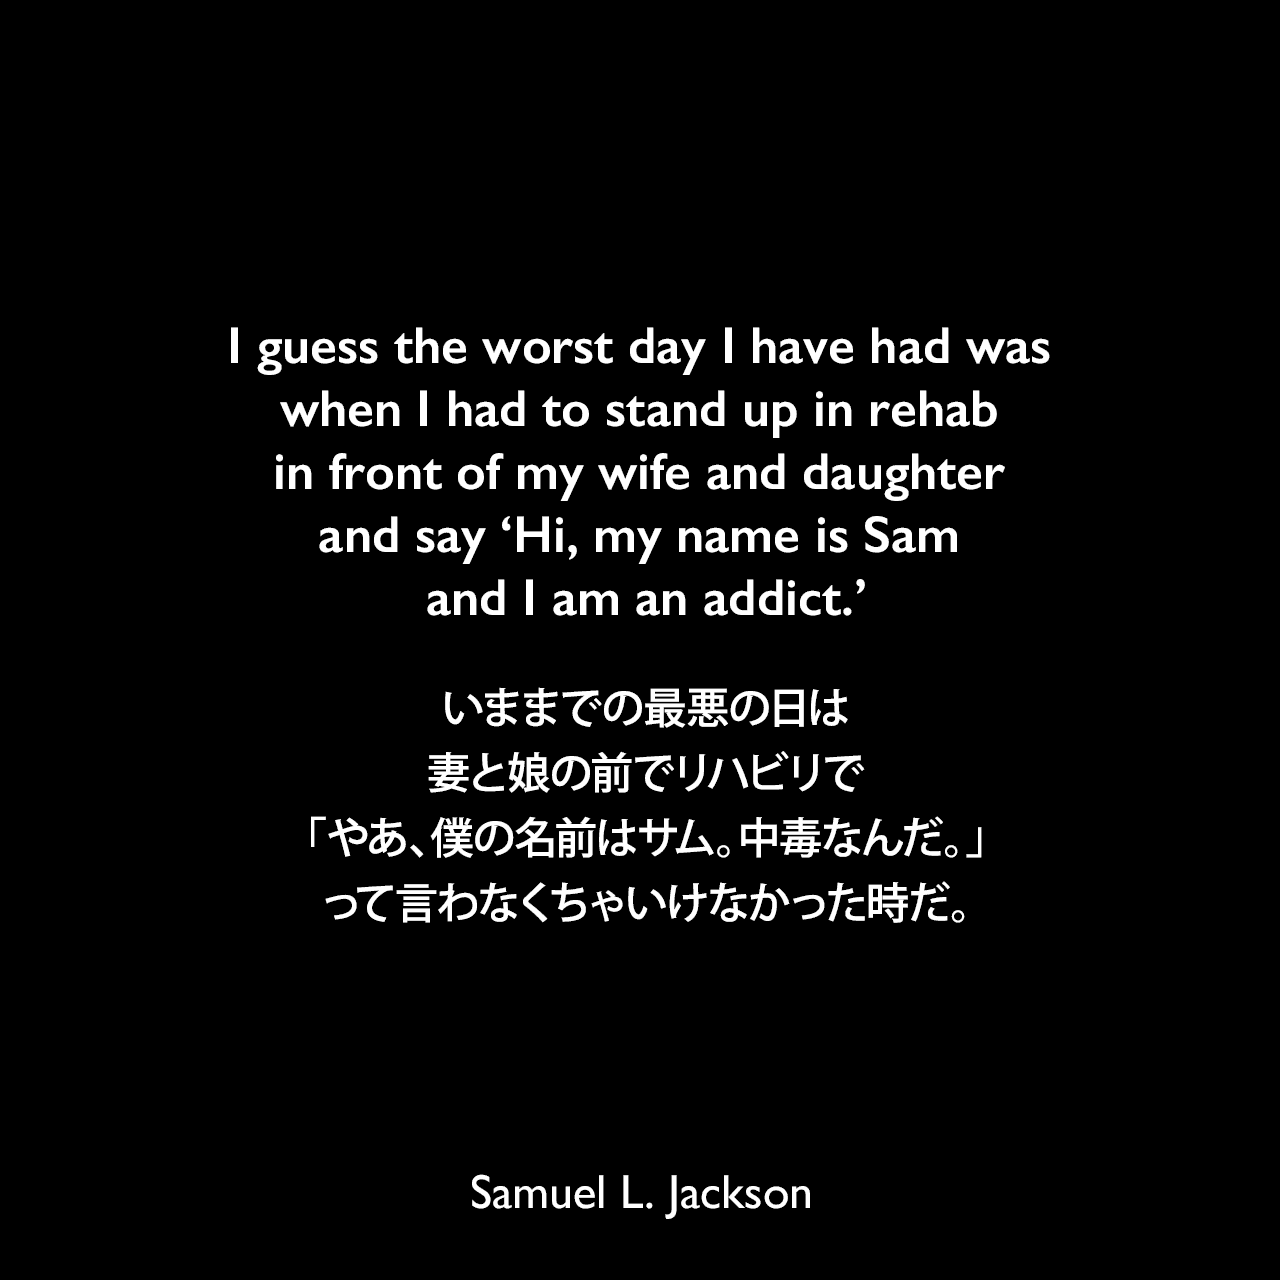 I guess the worst day I have had was when I had to stand up in rehab in front of my wife and daughter and say 'Hi, my name is Sam and I am an addict.'いままでの最悪の日は、妻と娘の前でリハビリで「やあ、僕の名前はサム。中毒なんだ。」って言わなくちゃいけなかった時だ。Samuel Leroy Jackson